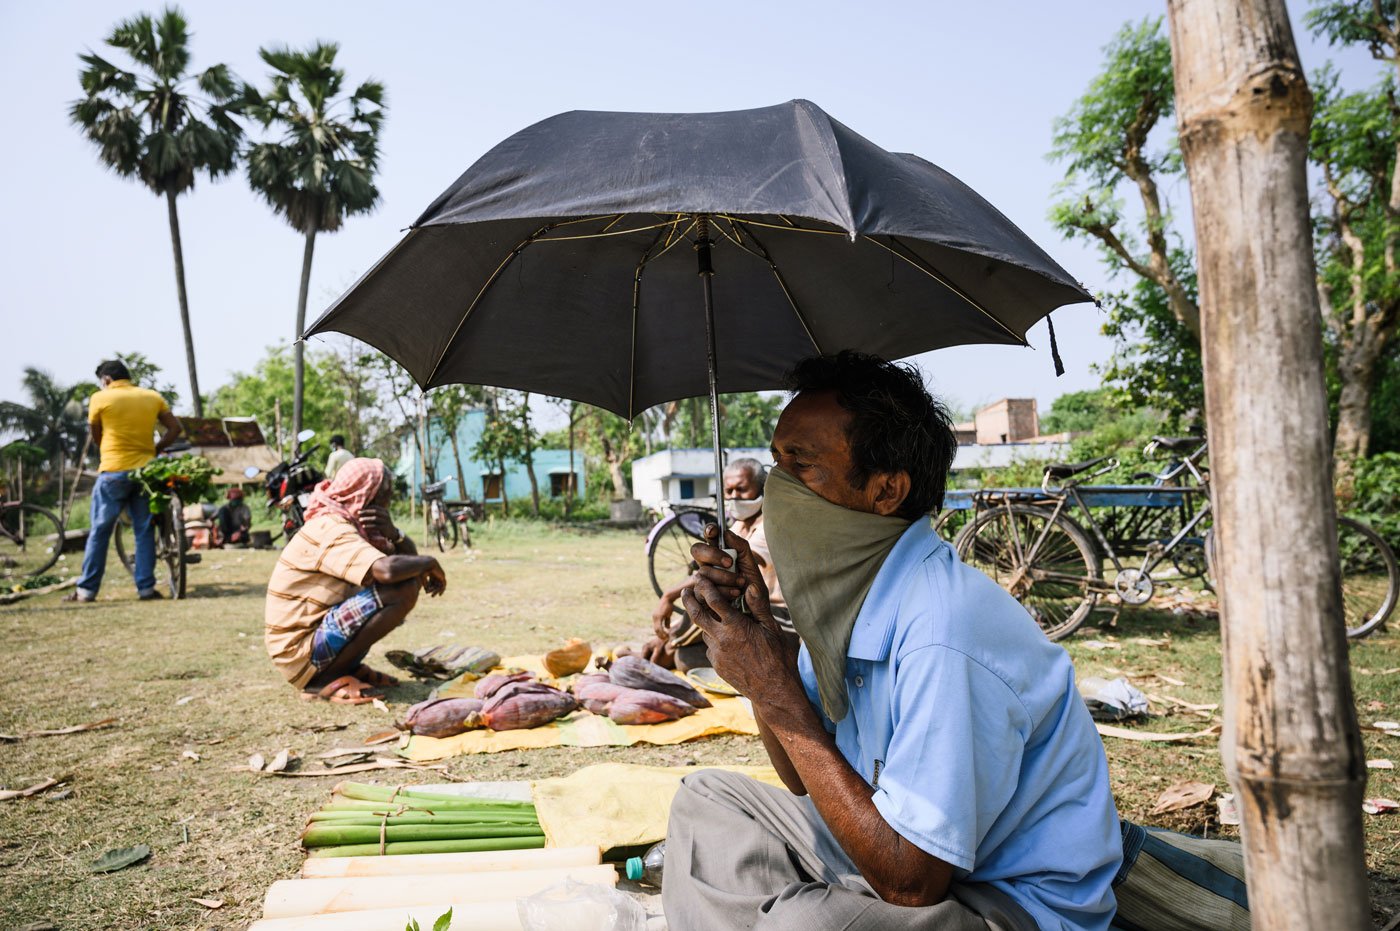 Without a plastic sheet to use as a temporary shade from the sun, Sadananda Roy, 58, sits in middle of the field with a few vegetables holding an umbrella. He was a domestic worker in Delhi, but came home before the lockdown. His only income now is from selling a few vegetables, which fetches him Rs 50-100 a day. "I didn't come here regularly because some days I don't have vegetables to sell,” he says. “I don't know what will happen in the future.”
